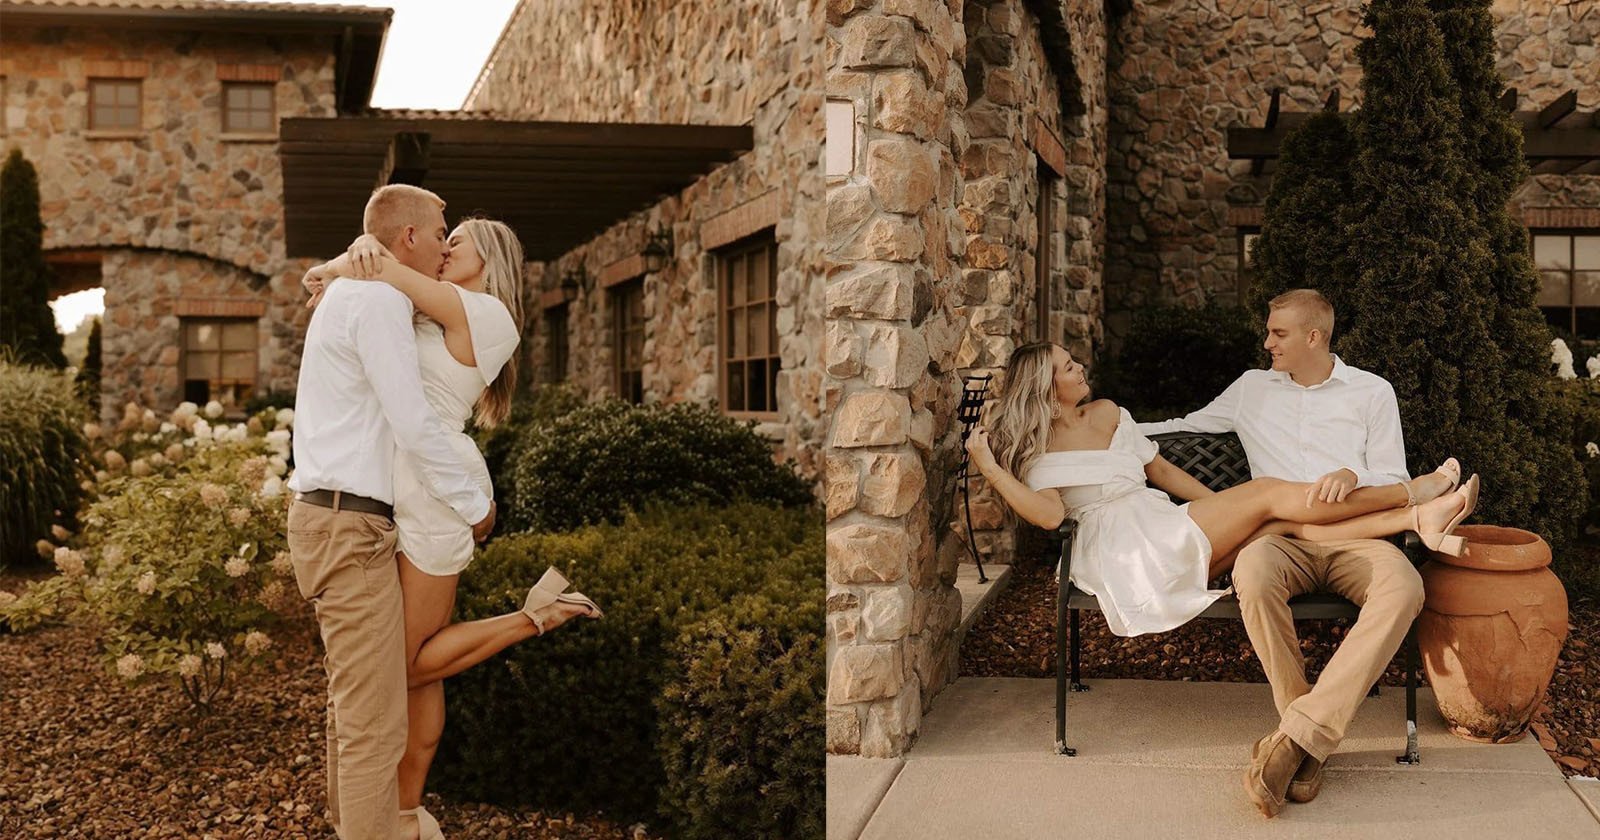  photographer italian engagement shoot was actually olive garden 